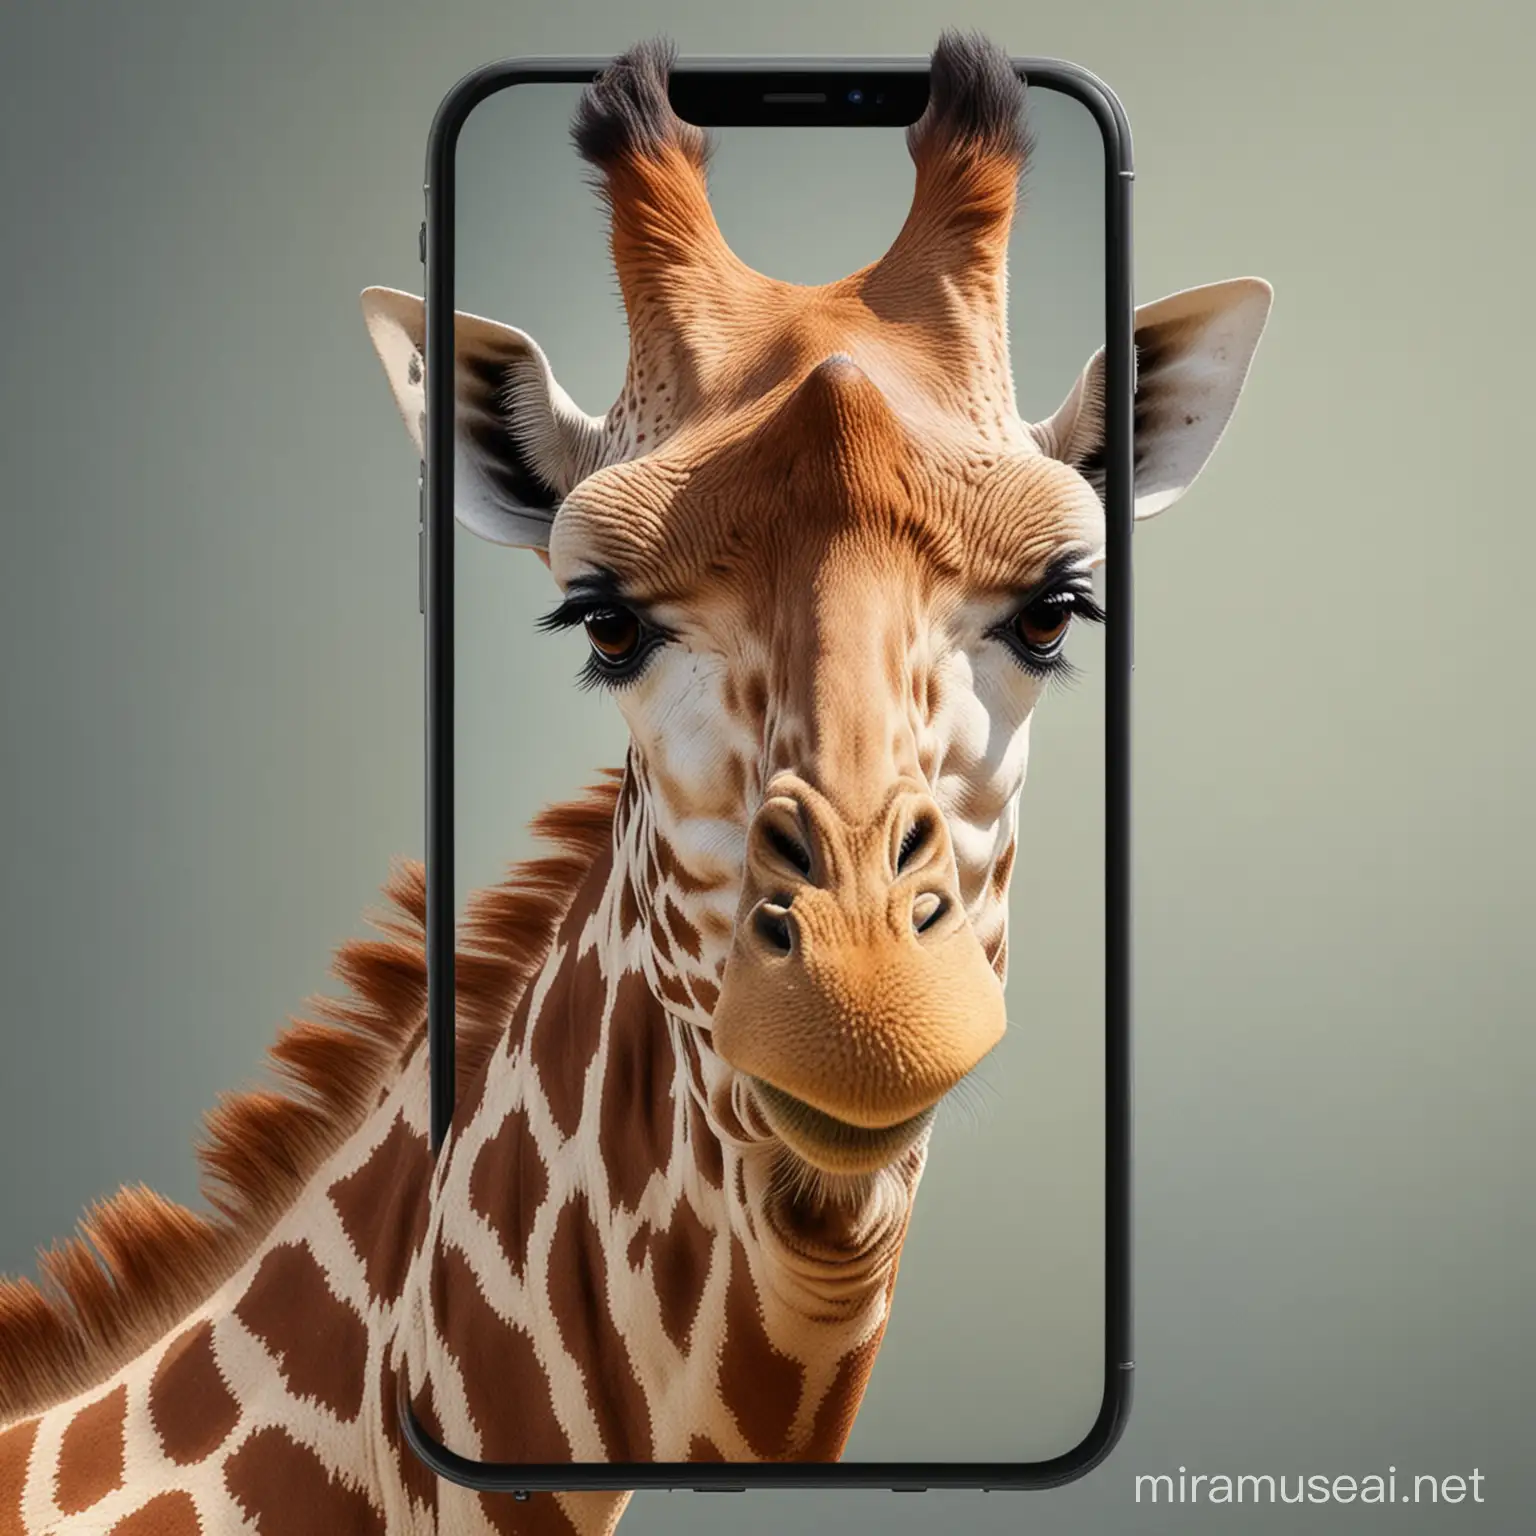 Realistic picture of one Giraffe, his face appears on the phone, and you see the rest of the giraffe body outside the screen. 